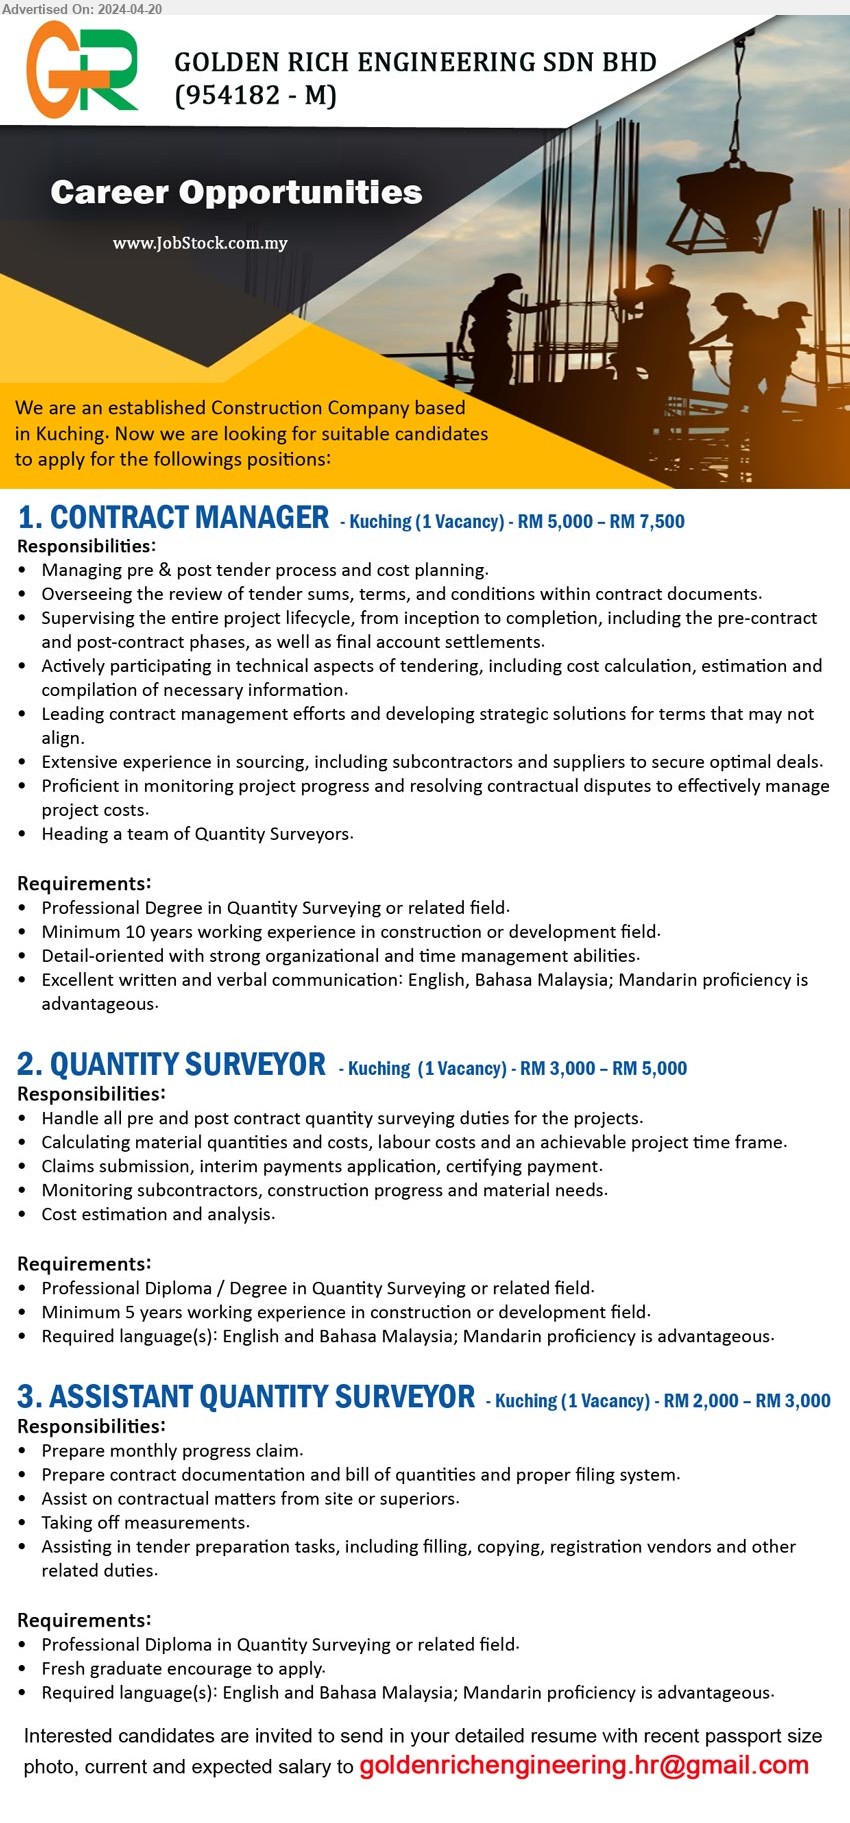 GOLDEN RICH ENGINEERING SDN BHD - 1. CONTRACT MANAGER (Kuching), RM 5,000 – RM 7,500, Professional Degree in Quantity Surveying, 10 yrs. exp.,...
2. QUANTITY SURVEYOR (Kuching), RM 3,000 – RM 5,000, Professional Diploma / Degree in Quantity Surveying, 5 yrs. exp....
3. ASSISTANT QUANTITY SURVEYOR (Kuching), RM 2,000 – RM 3,000, Diploma in Quantity Surveying, Fresh graduate encourage to apply....
Email resume to ..